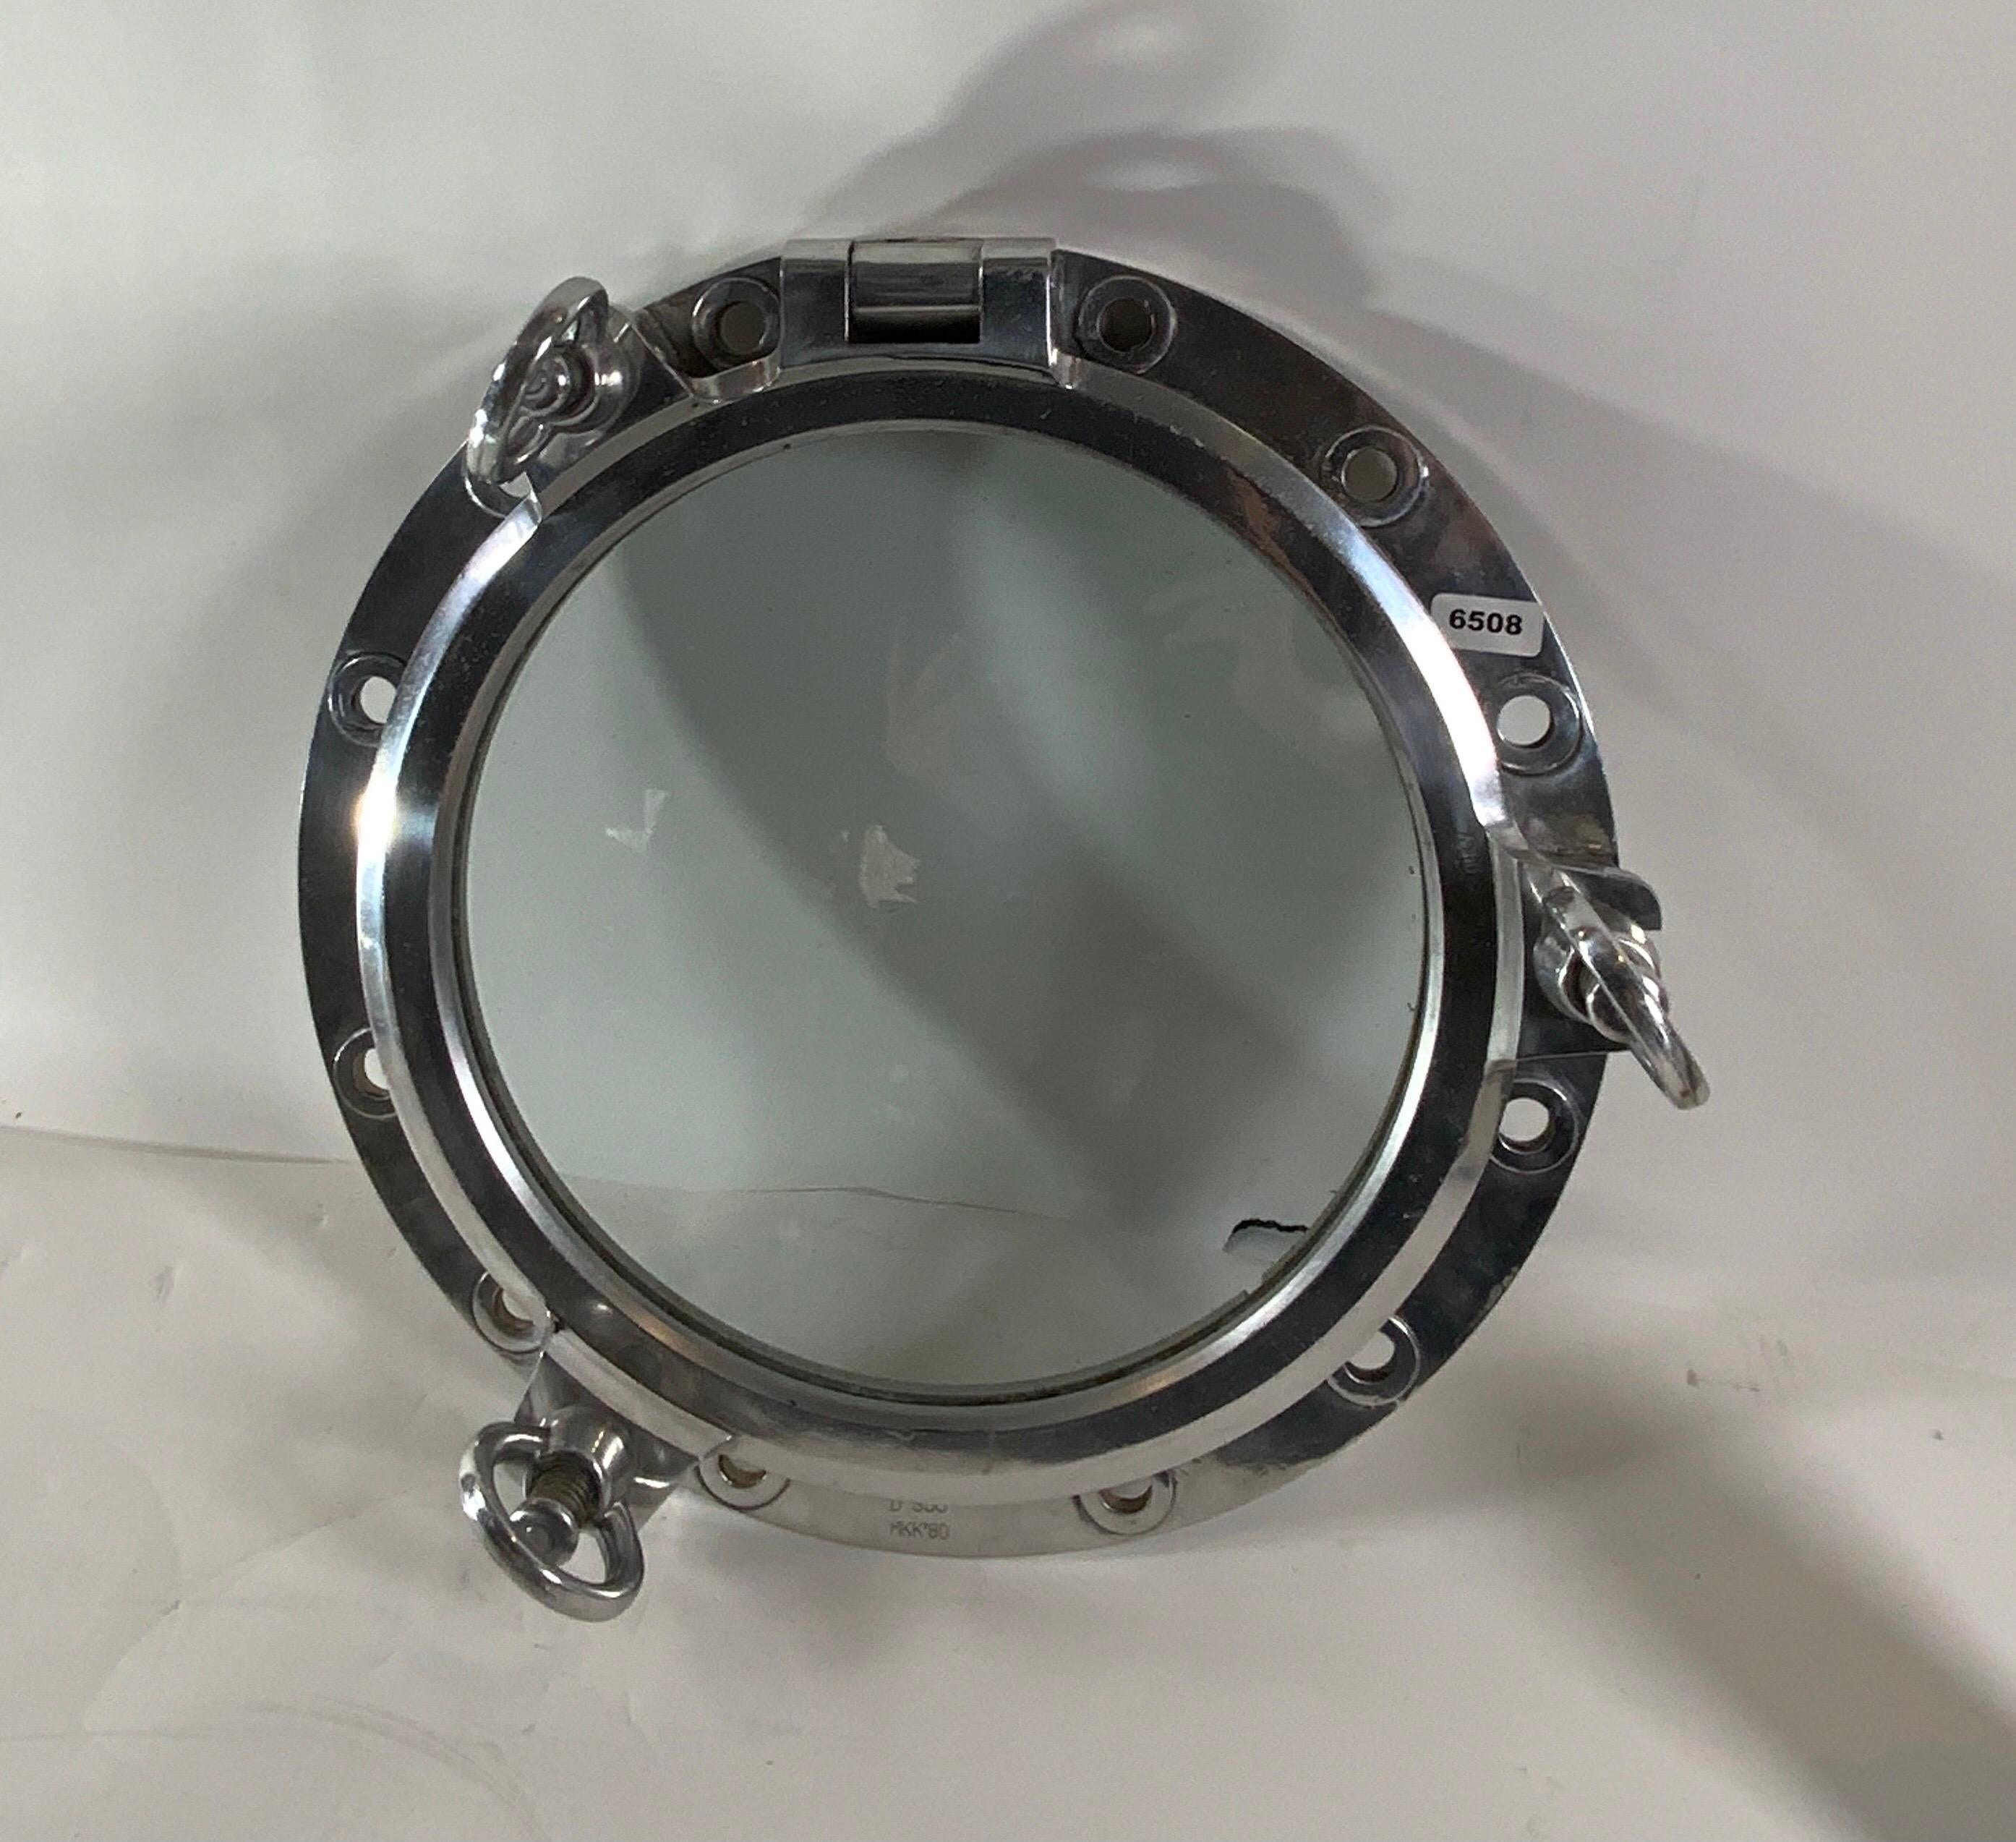 Authentic polished aluminum ship's porthole fitted with glass. Door is hinged and fitted with three dogbolts. The highly polished porthole is ready for display.

Overall dimensions: glass diameter: 14